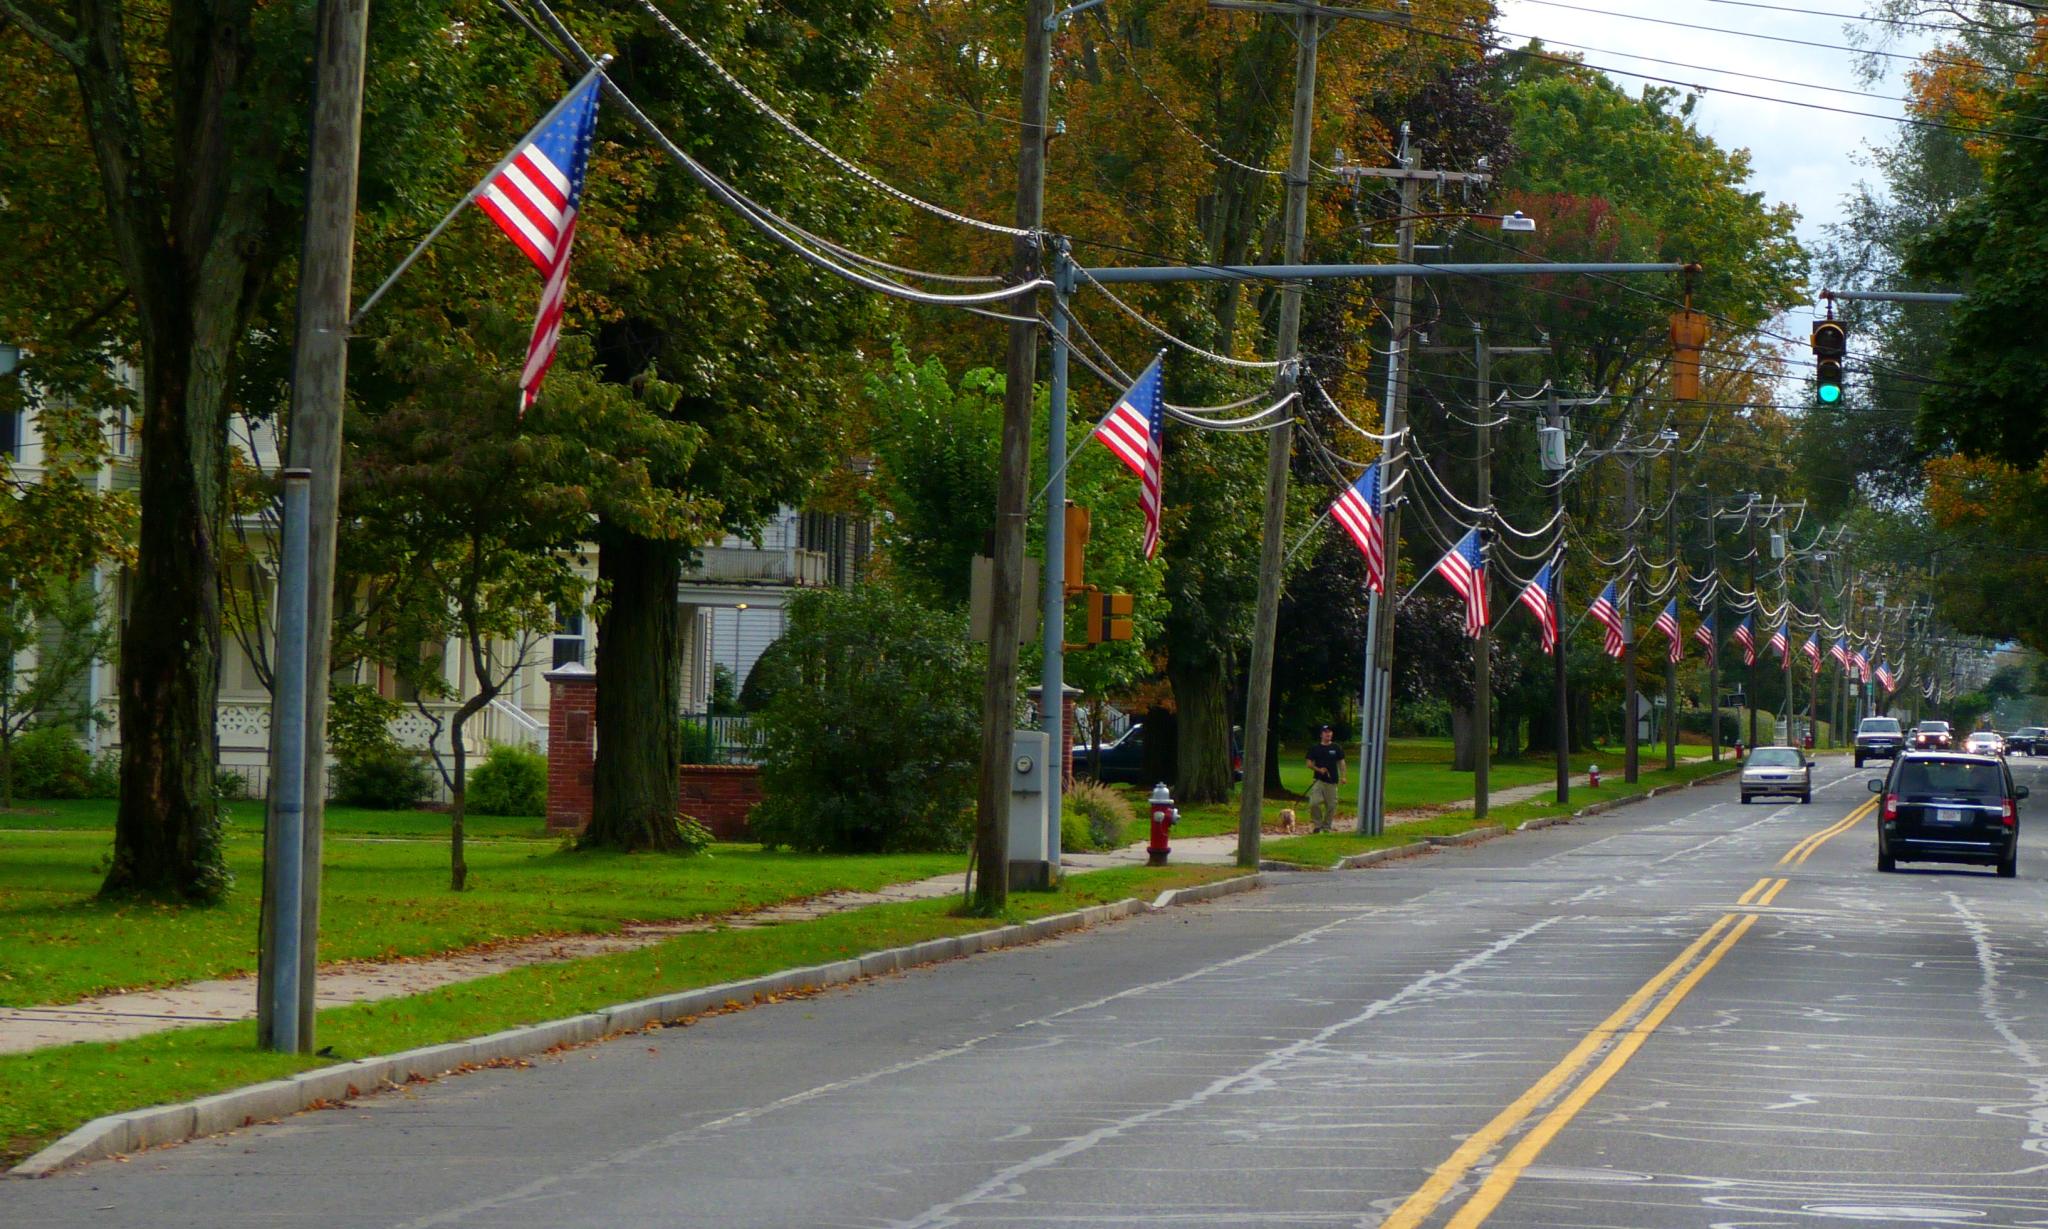 several american flags on poles down the street